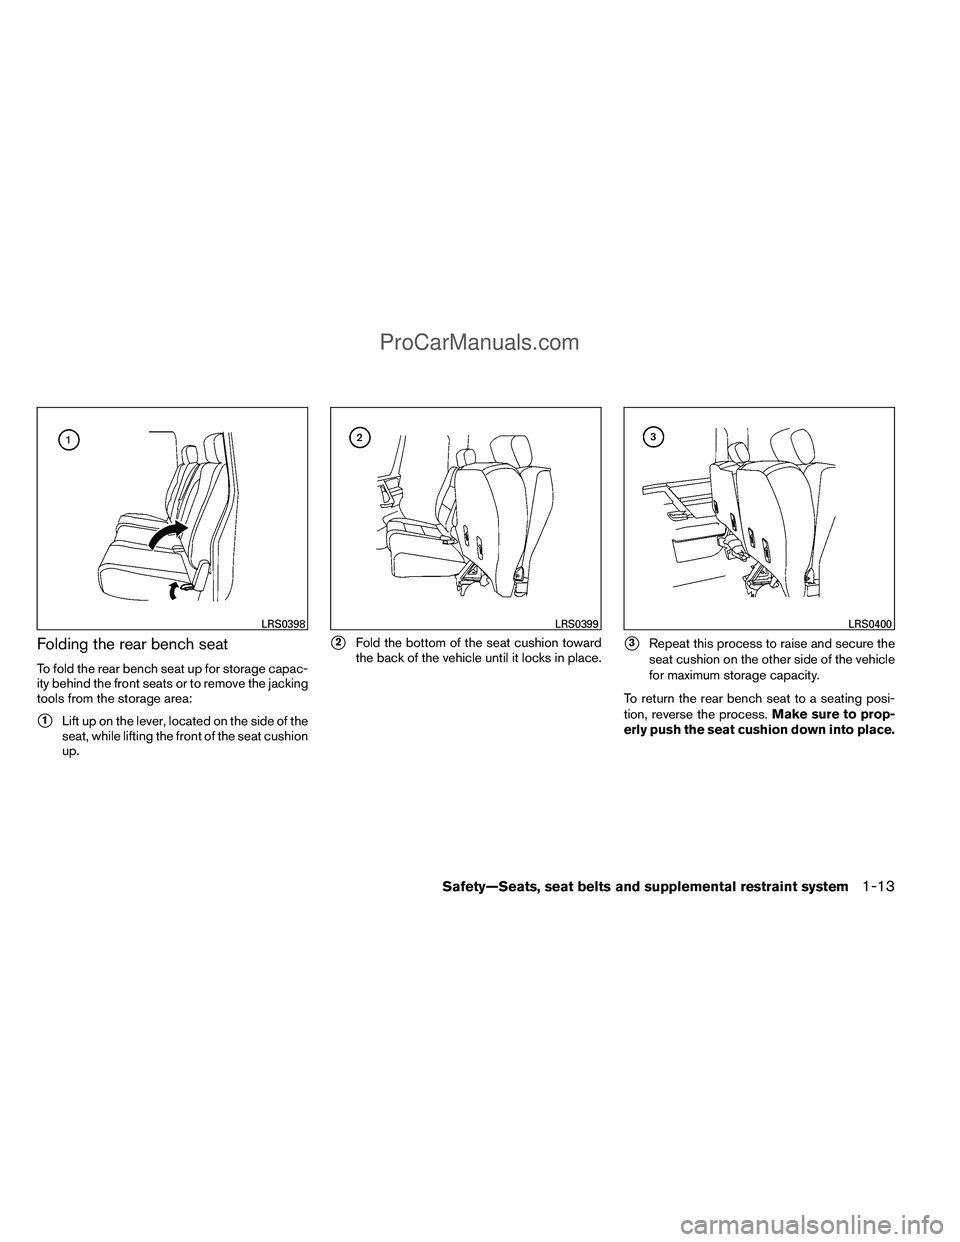 NISSAN TITAN 2012 Owners Manual Folding the rear bench seat
To fold the rear bench seat up for storage capac-
ity behind the front seats or to remove the jacking
tools from the storage area:
1Lift up on the lever, located on the si